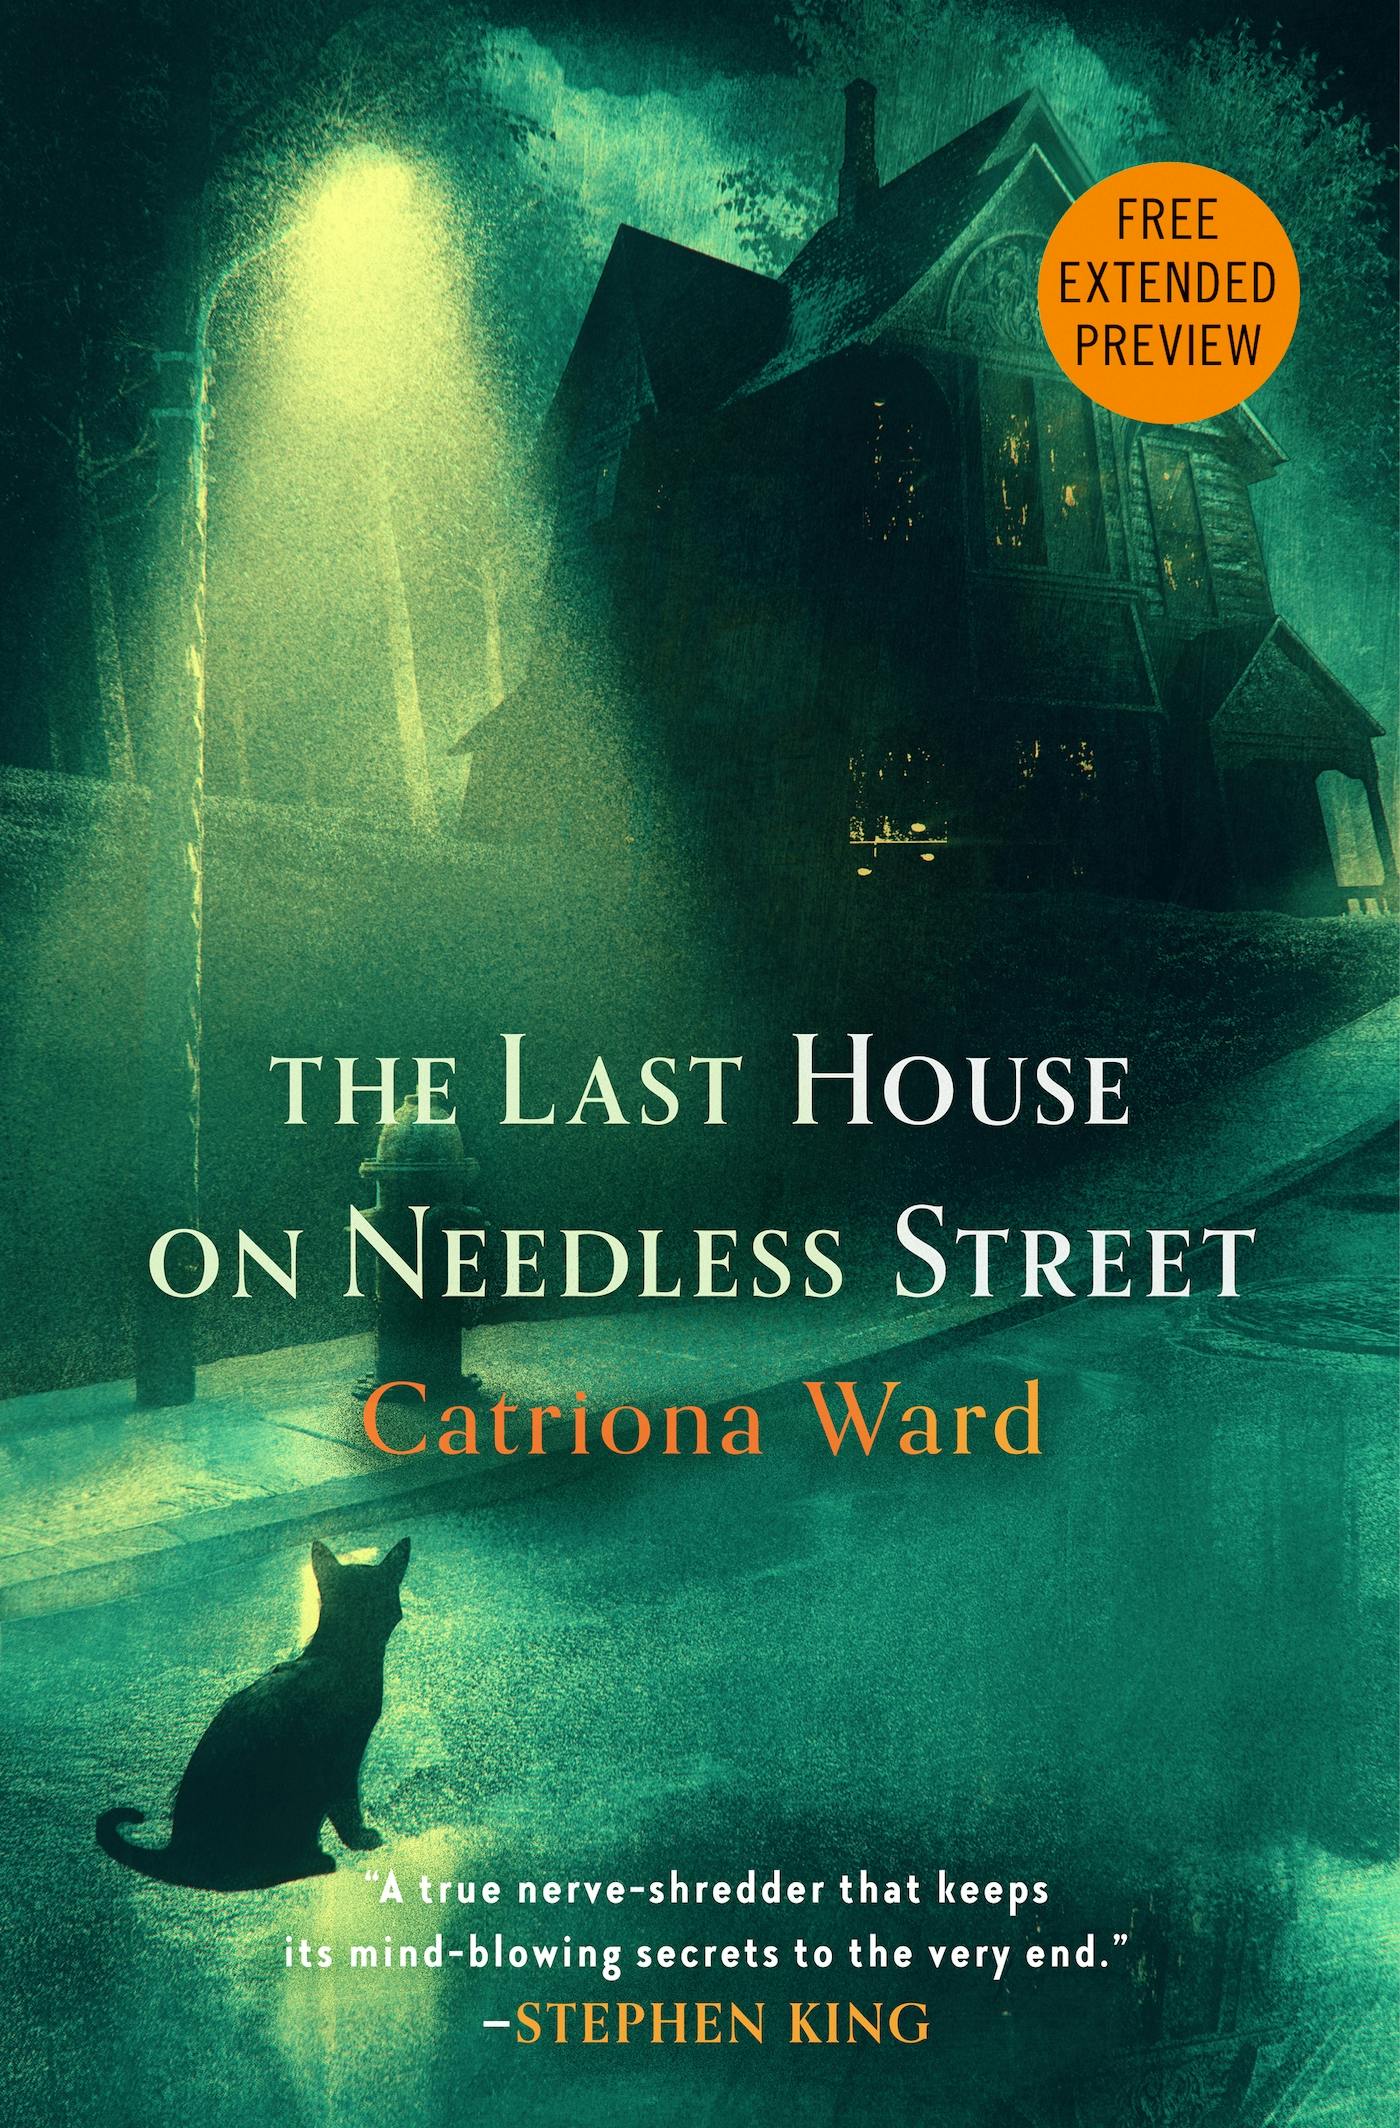 Cover for the book titled as: The Last House on Needless Street Sneak Peek